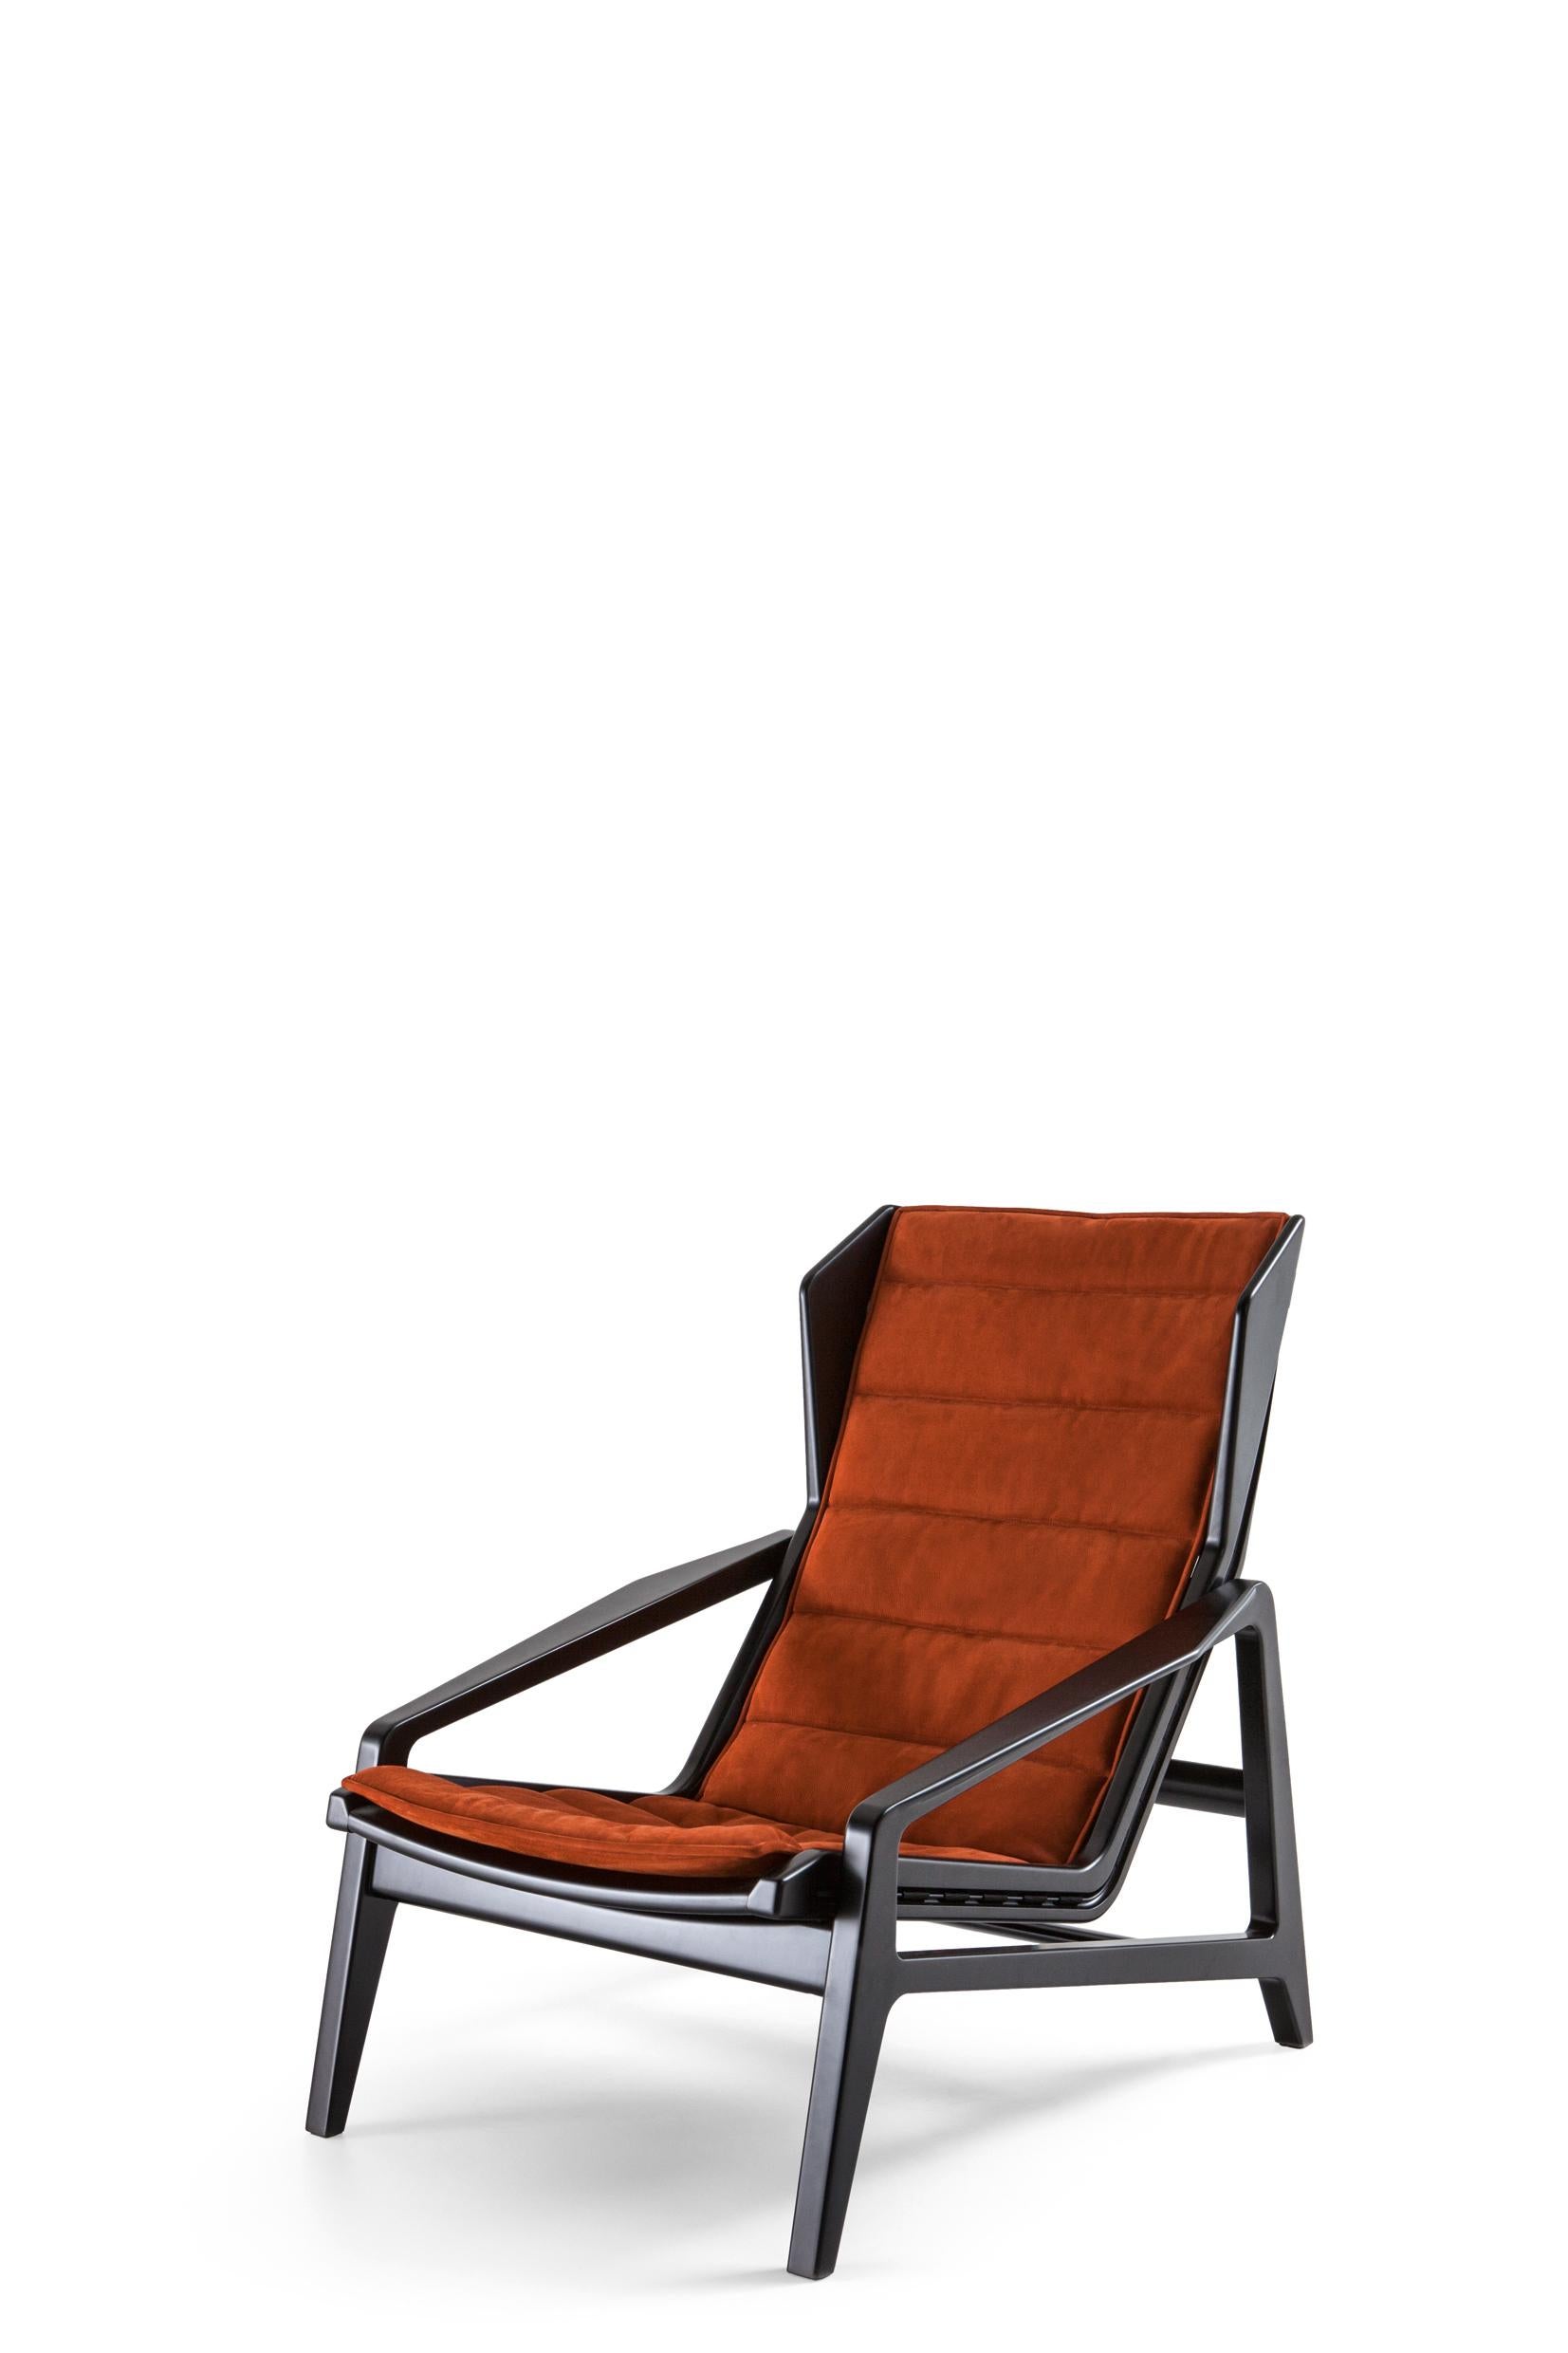 Brown (SD974_Rust) Armchair in Leather and Glossy Black Wood Molteni&C by Gio Ponti - D.156.3 2